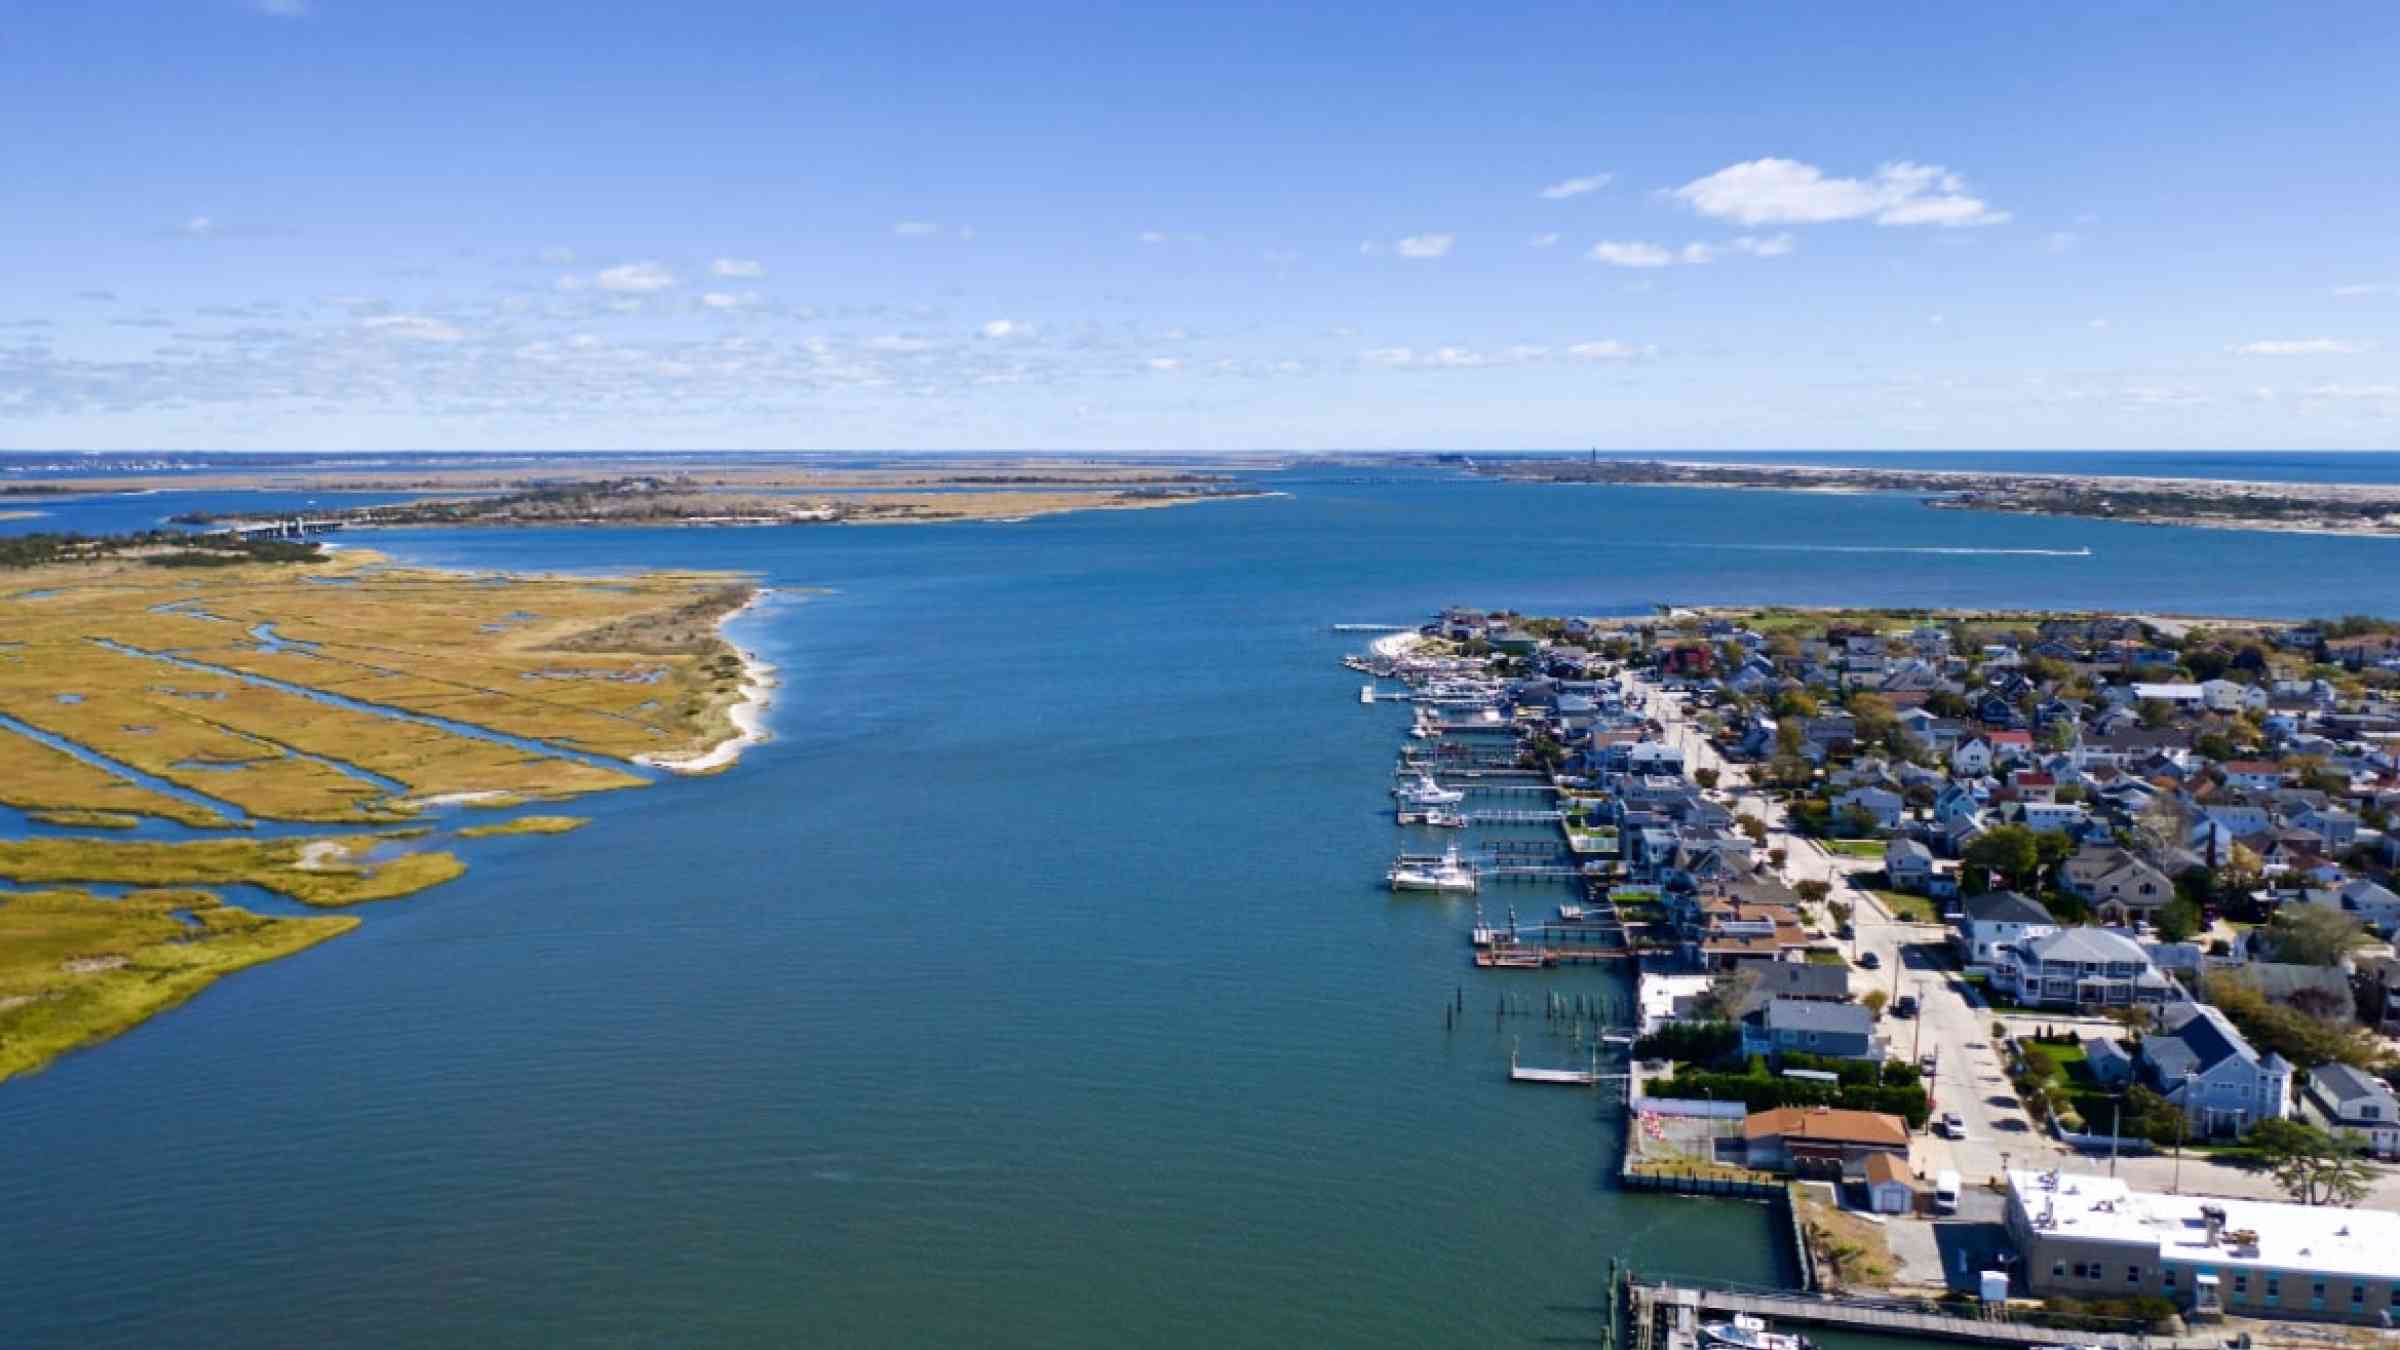 aerial shot over the marshlands, on a sunny morning at Point Lookout on Long Island, New York. Viewing the beautiful blue skies, a few clouds & some empty boats docked at the pier